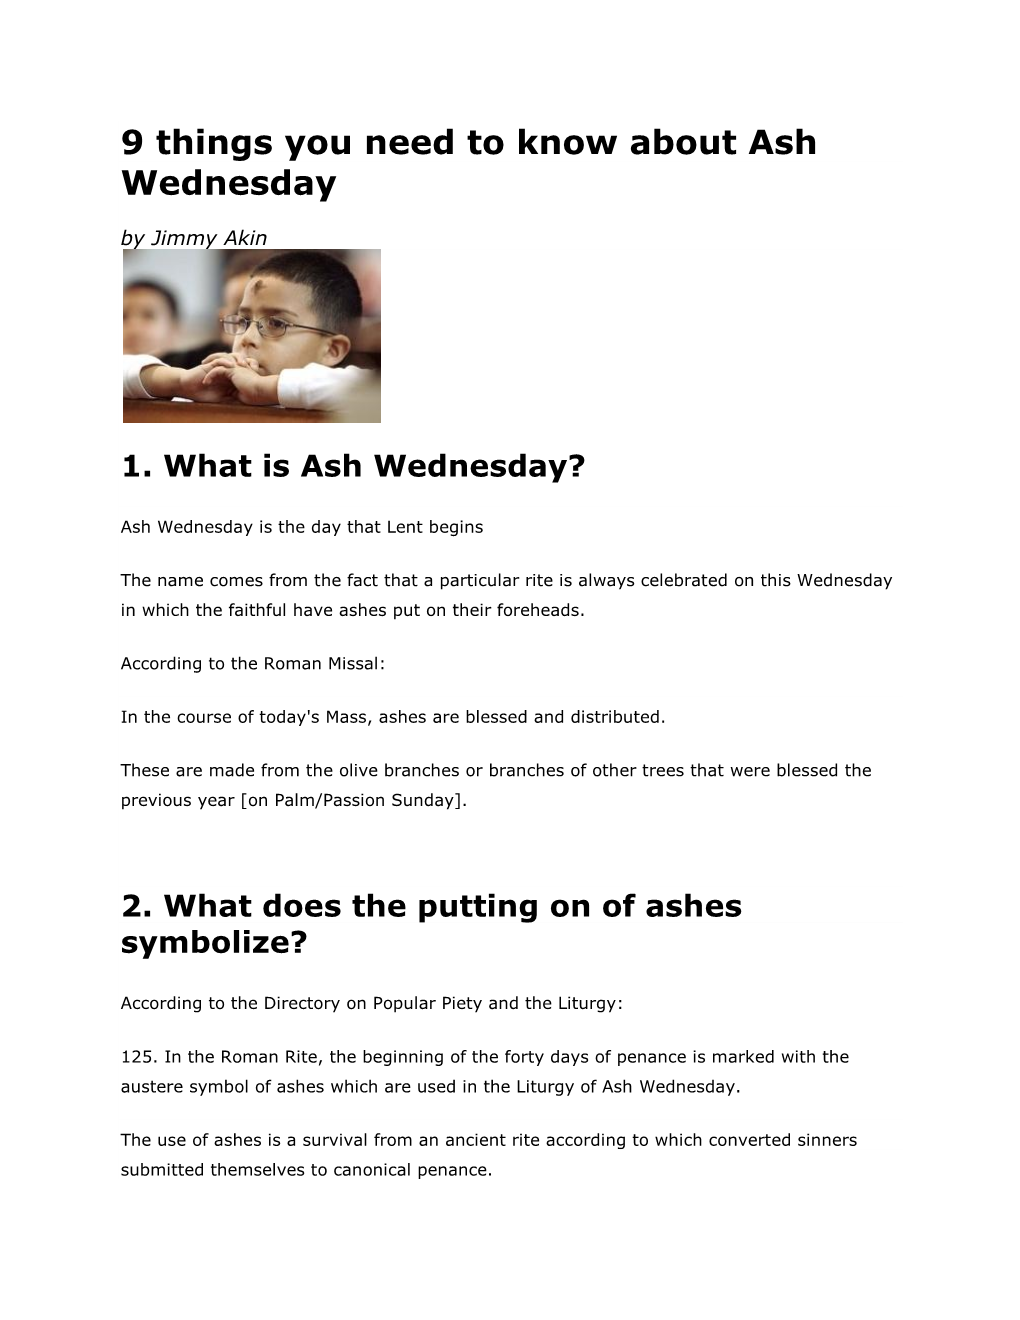 9 Things You Need to Know About Ash Wednesday by Jimmy Akin